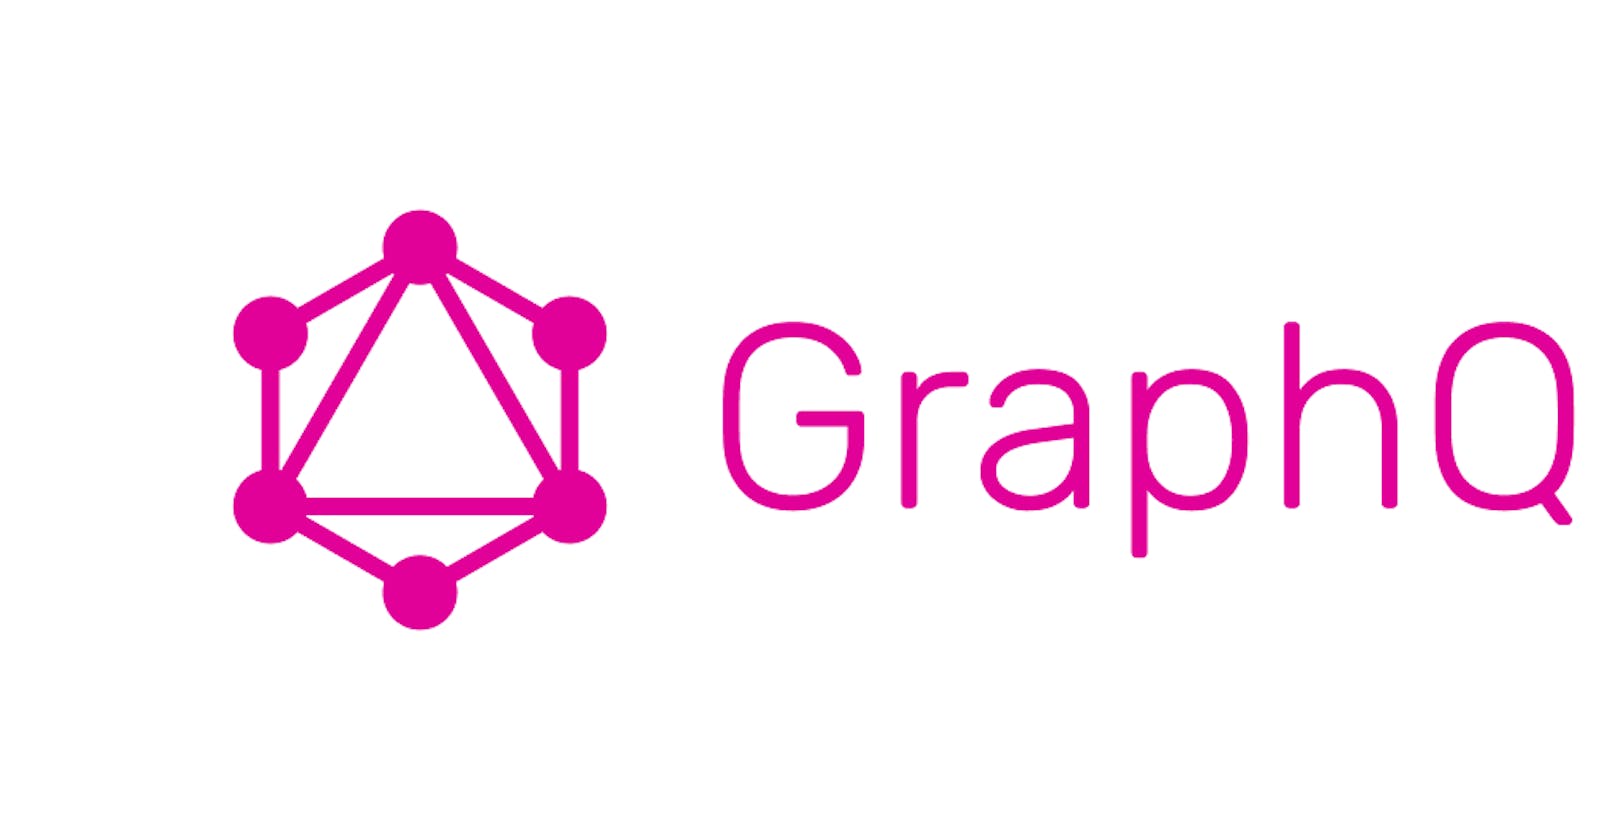 What is GraphQL and how to build a GraphQL server?